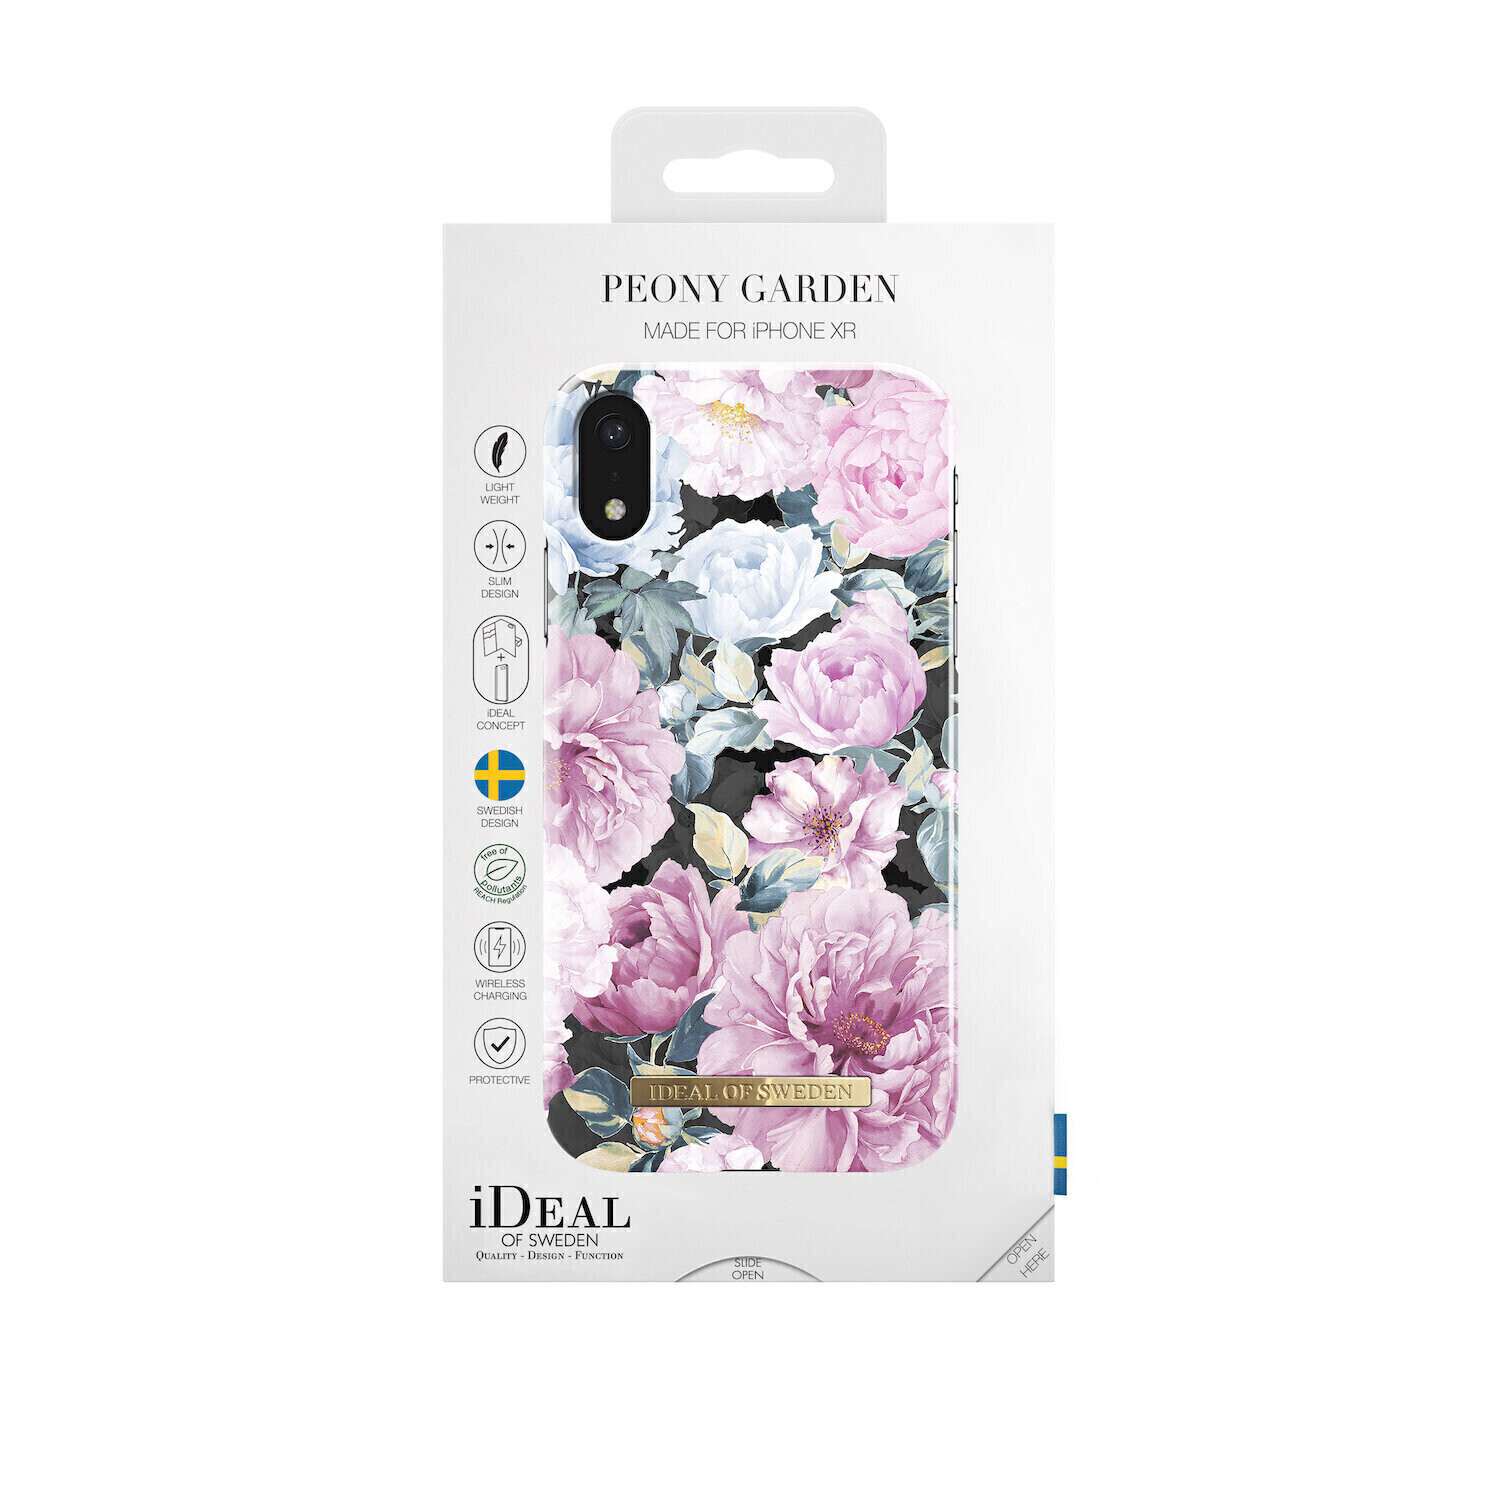 iDeal Of Sweden iPhone XR Fashion Case S/S 2018, Peony Garden